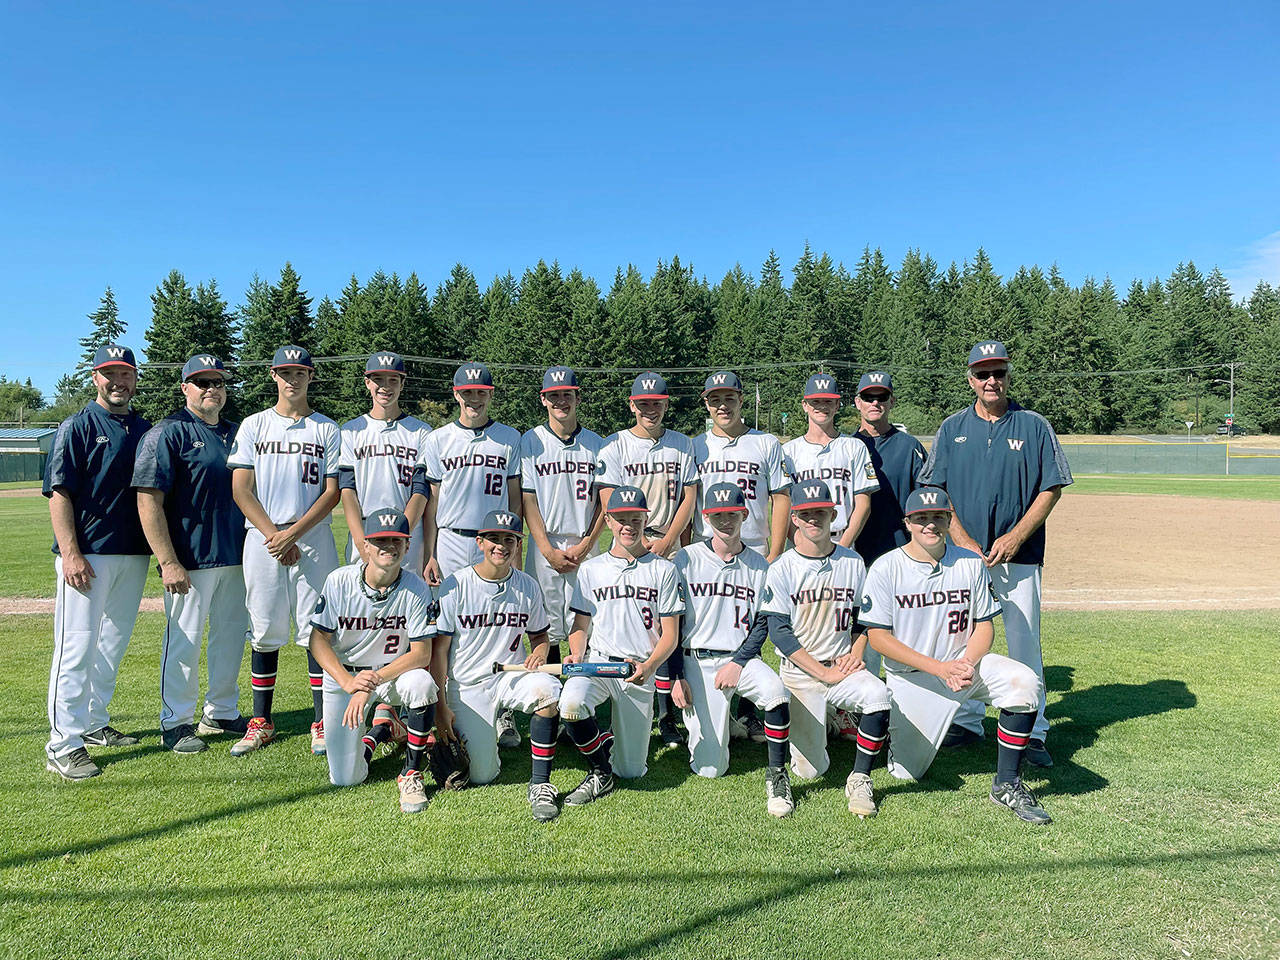 The Wilder A baseball team won the American Legion District 1 A Tournament held at Port Angeles’ Volunteer Field over the weekend. The team will compete at the American Legion A State Tournament in Spokane beginning Monday. Team members and coaches are front row, from left, Alex Angevine, Bryant Laboy, Hunter Stratford, Camren Sotebeer, Tate Alton and Braydan White; back row, from left, Manager Mike Politika, Coach Gary White, Juan Terrones, Rylan Politika, Blake Sohlberg, Dylan Micheau, Josiah Gooding, Joseph Ritchie, Luke Flodstrom, Coach Eric Flodstrom and Coach Steve Uvila. Not pictured is Ethan Staples.